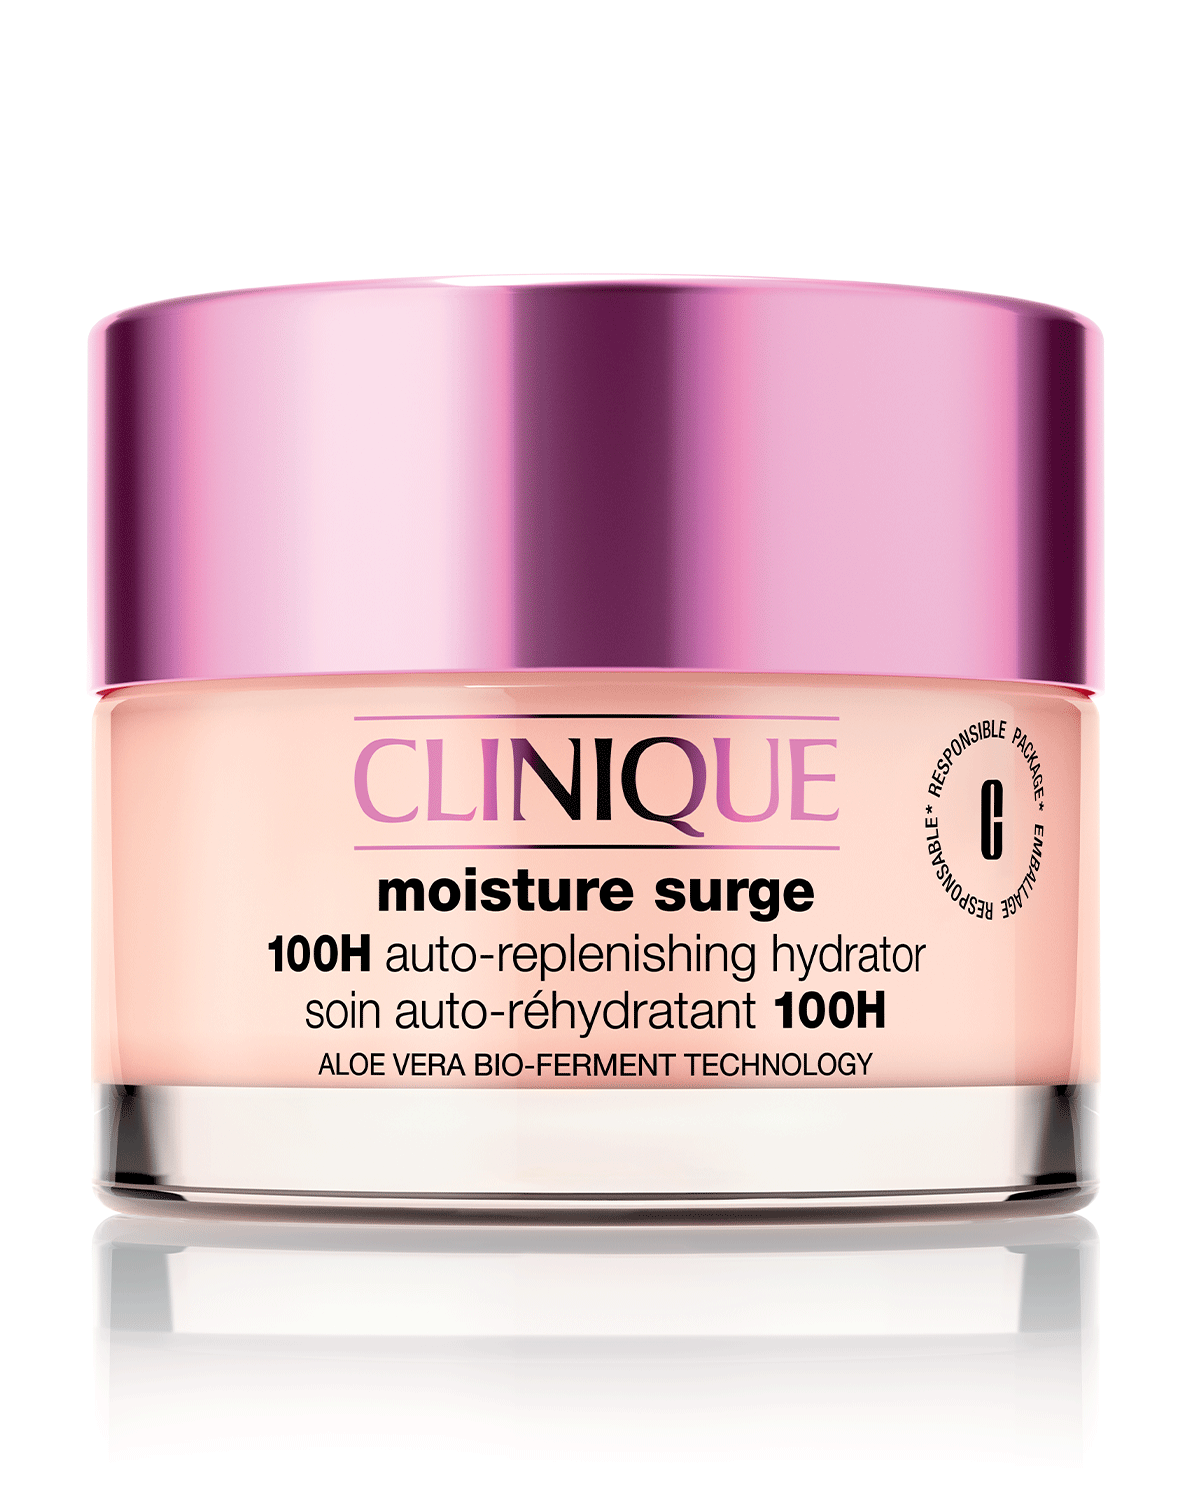 Tolle Haut, tolle Aktion: Limited Edition Moisture Surge™ 100H Auto-Replenishing Hydrator